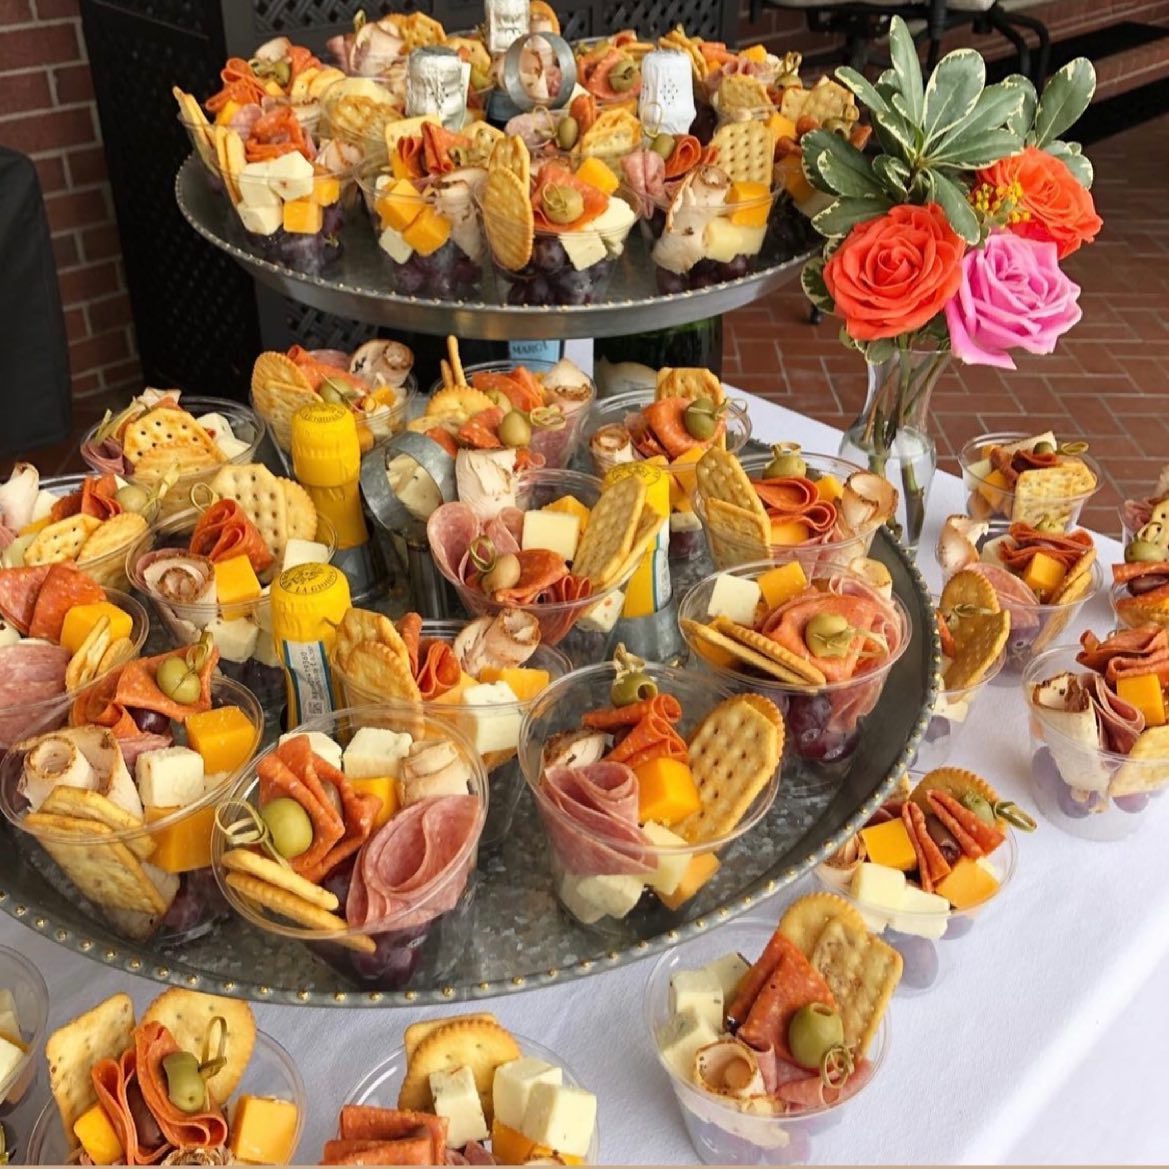 cups full of meat, fruit, vegetables, cheese and crackers on platters with flowers in the background